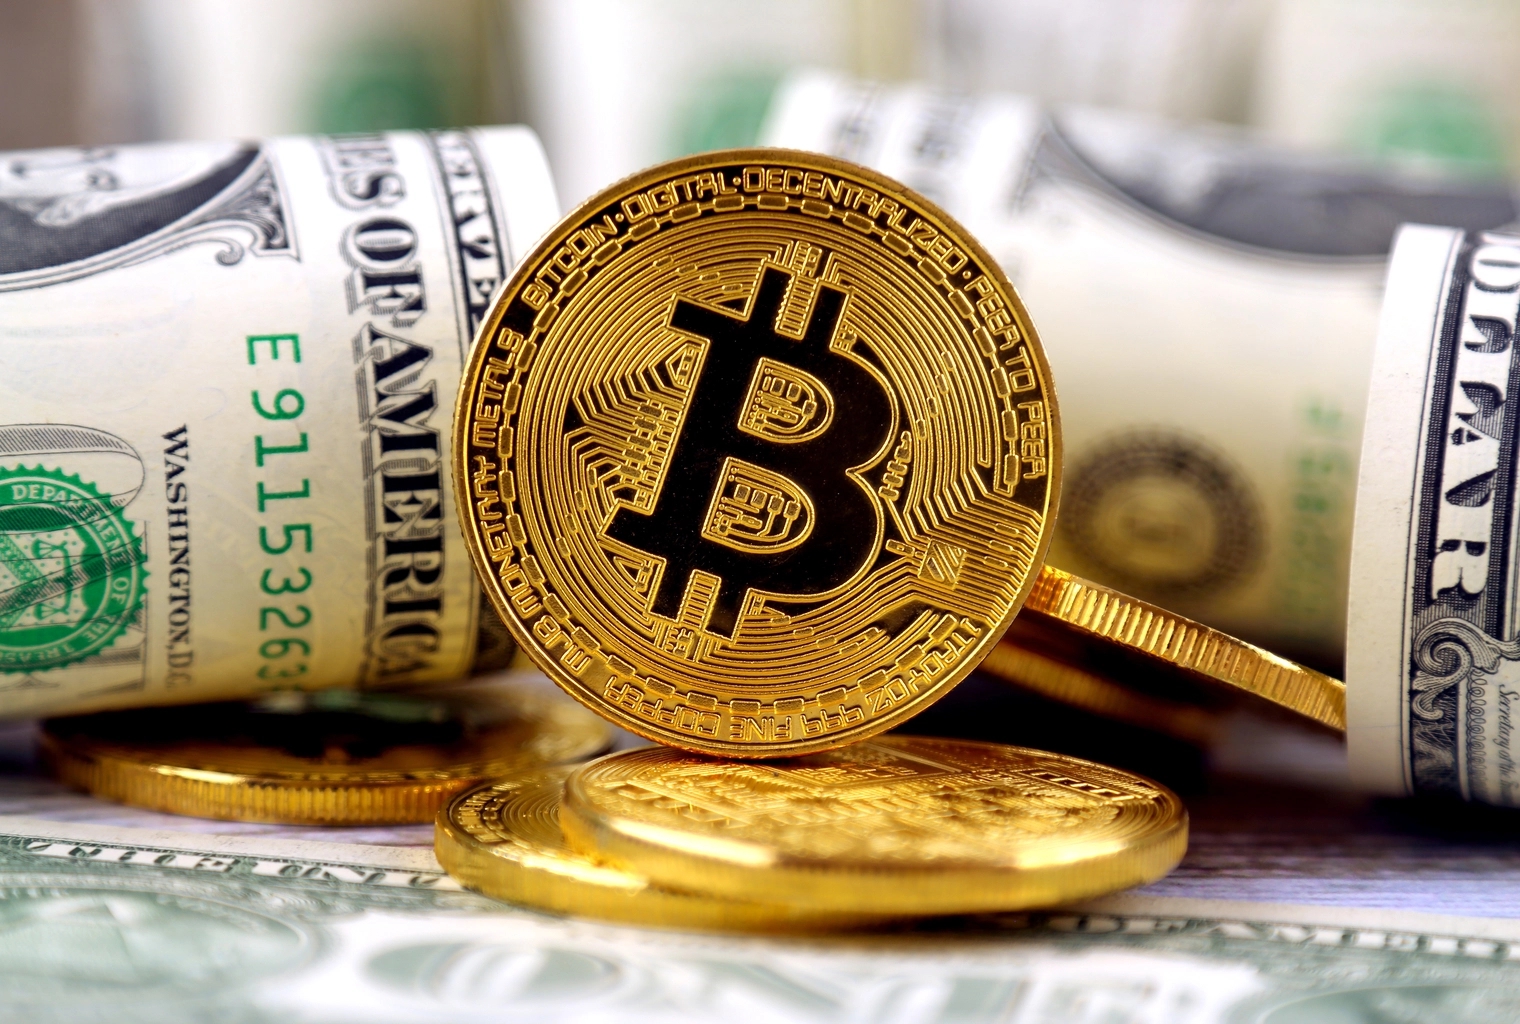 Bitcoin Price Prediction as US Income and Spending Data Is Released – Bear Market Nearing End?